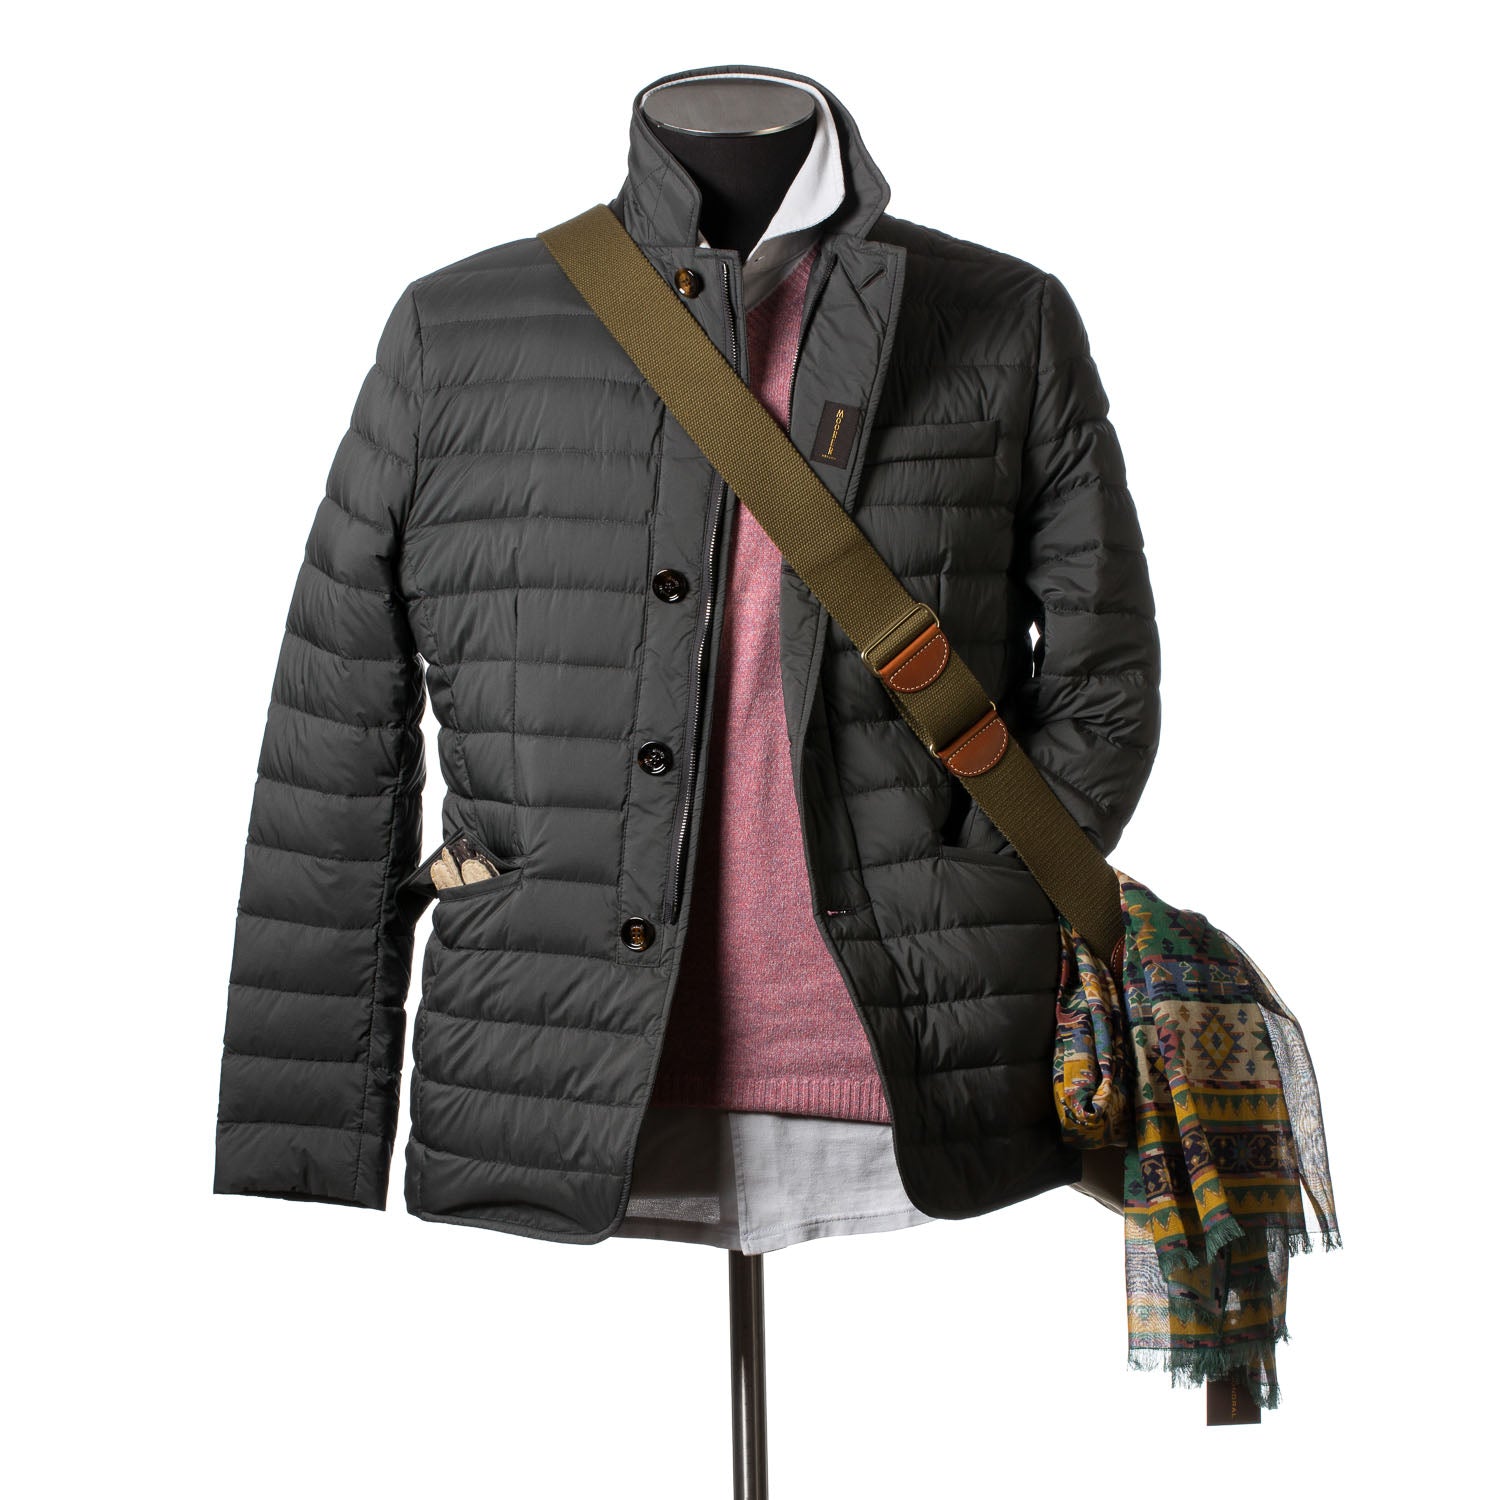 Casual Layers "Milanese"